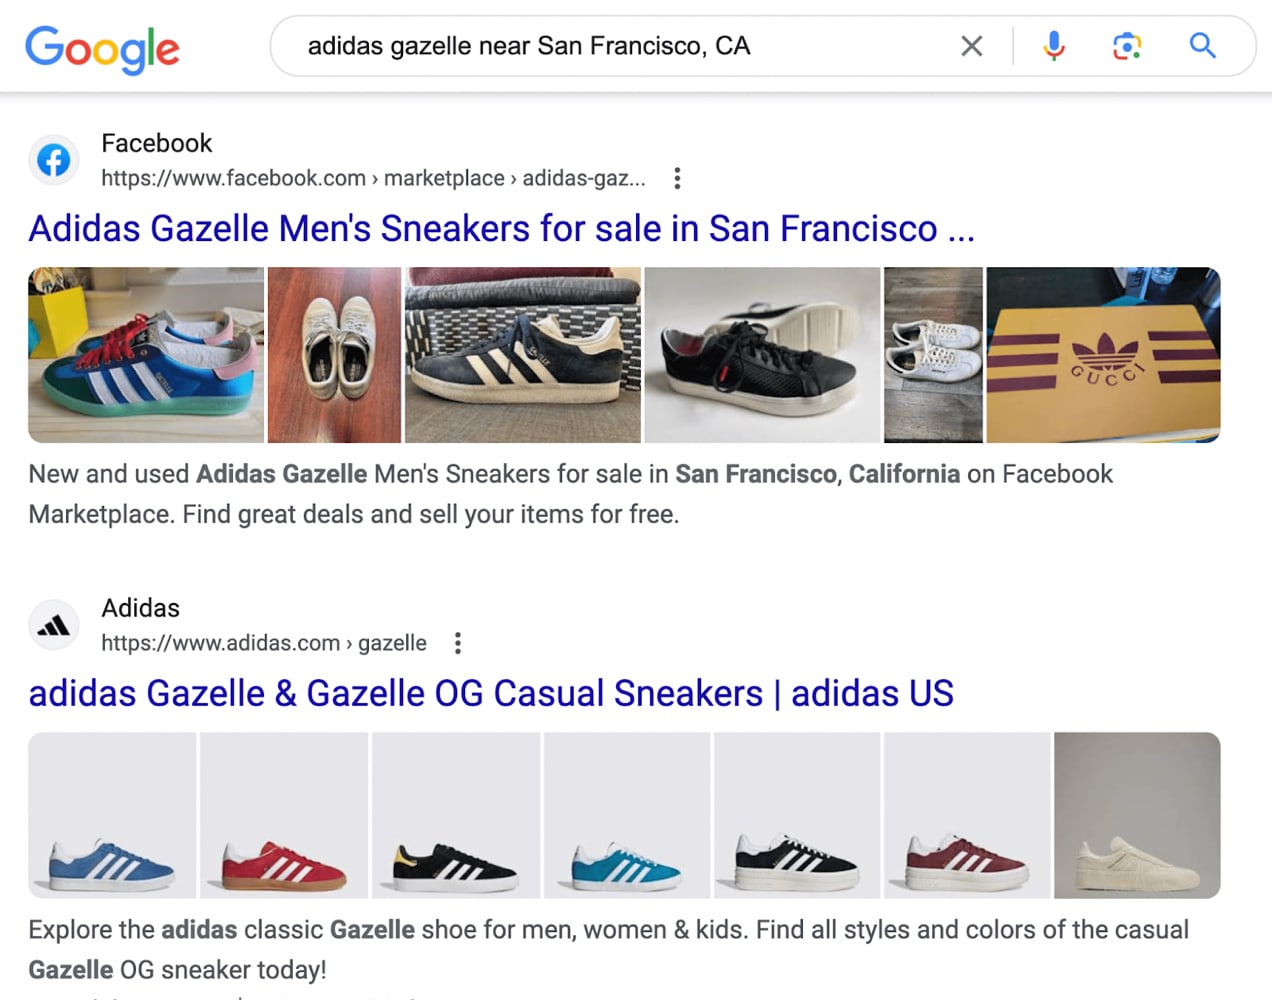 search for adidas gazelle shoes on Google